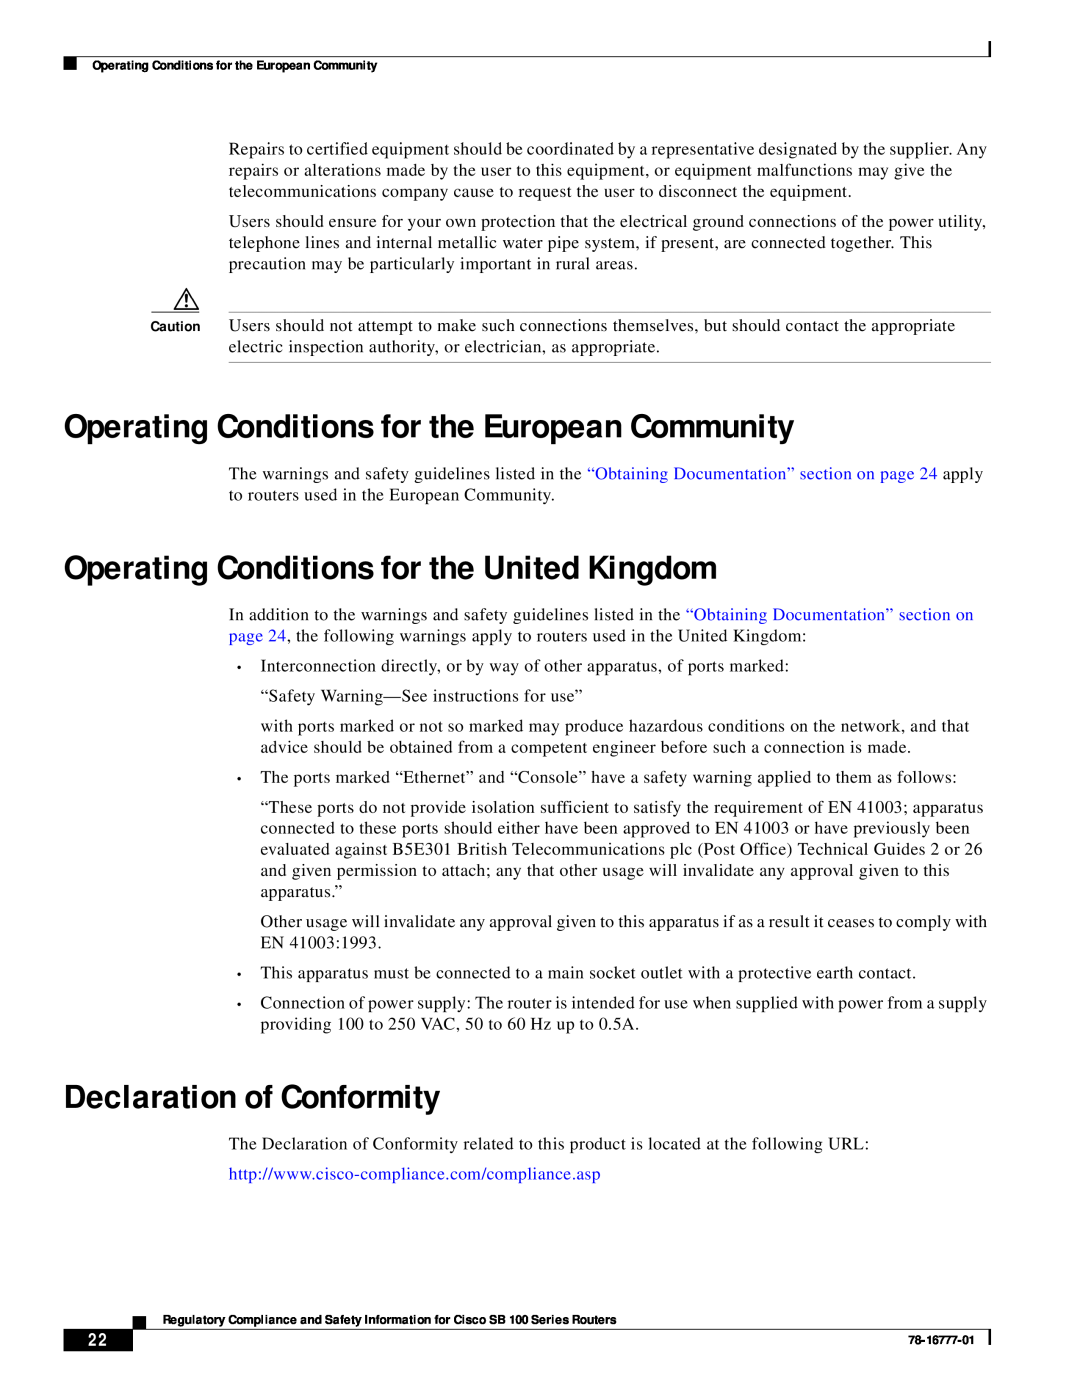 Cisco Systems SB 100 Series Operating Conditions for the European Community, Operating Conditions for the United Kingdom 